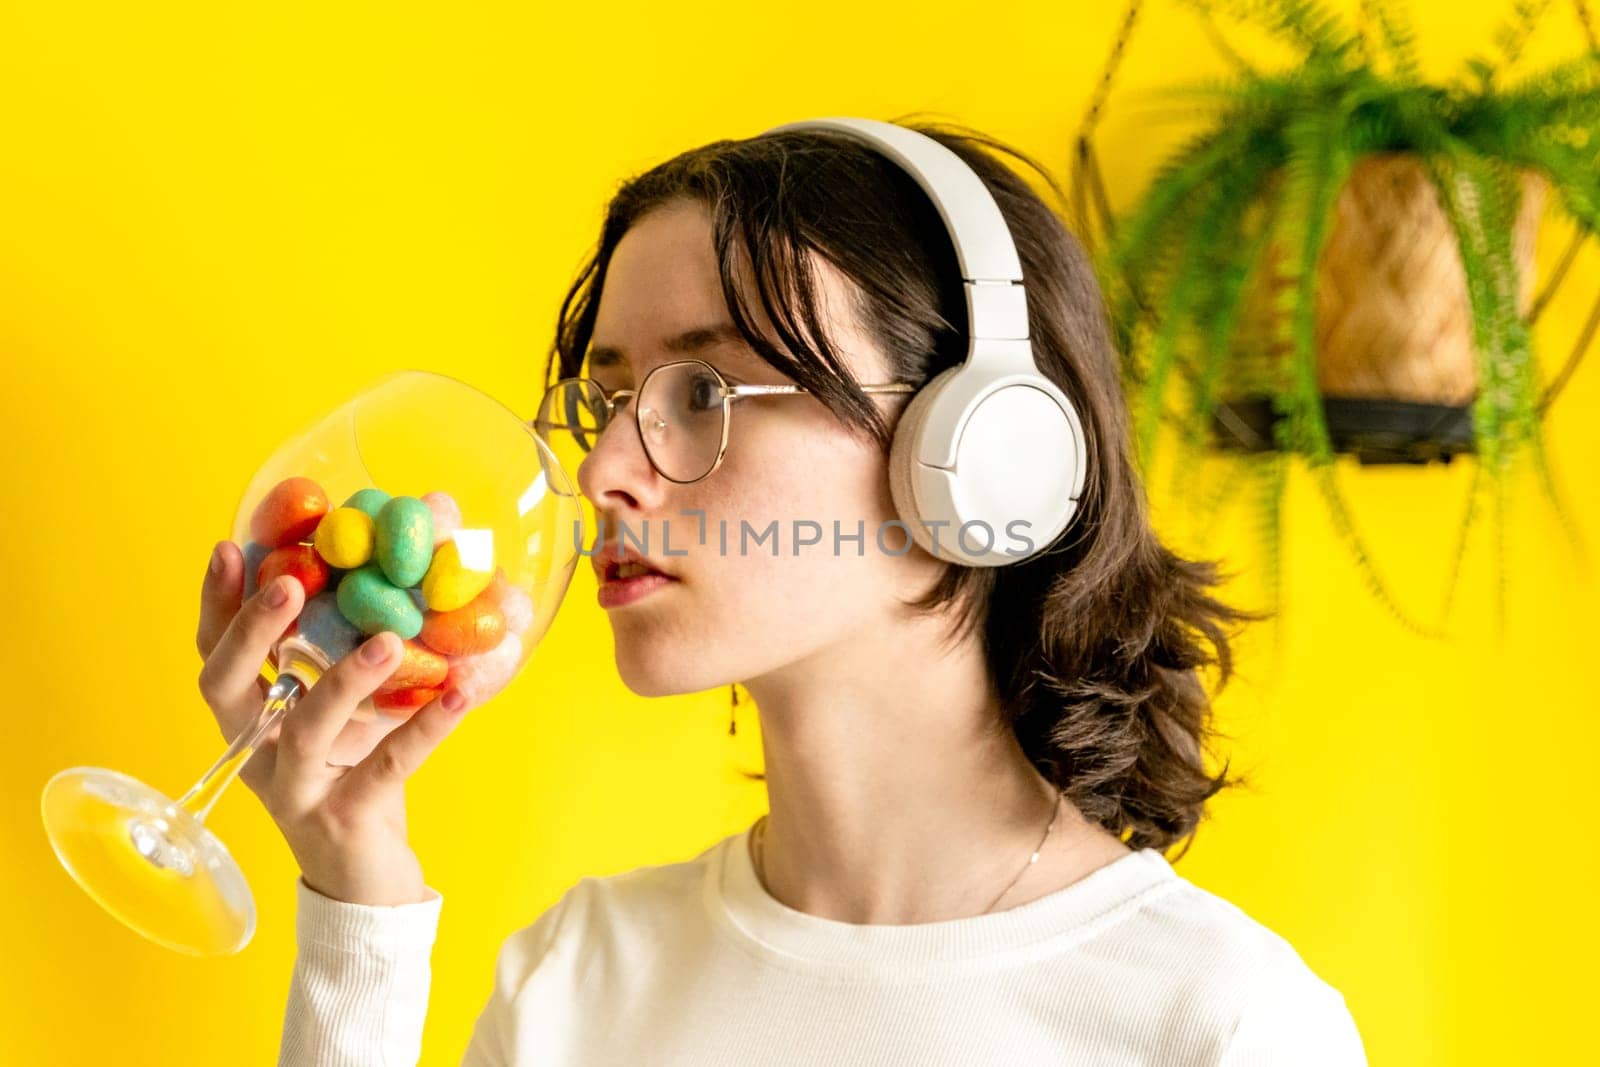 One young Caucasian beautiful teenage girl in glasses and headphones holds a wine glass with Easter marble decorative eggs standing and looking to the side on a yellow background with a hanging palm flower on a spring day in the room, side view close-up.